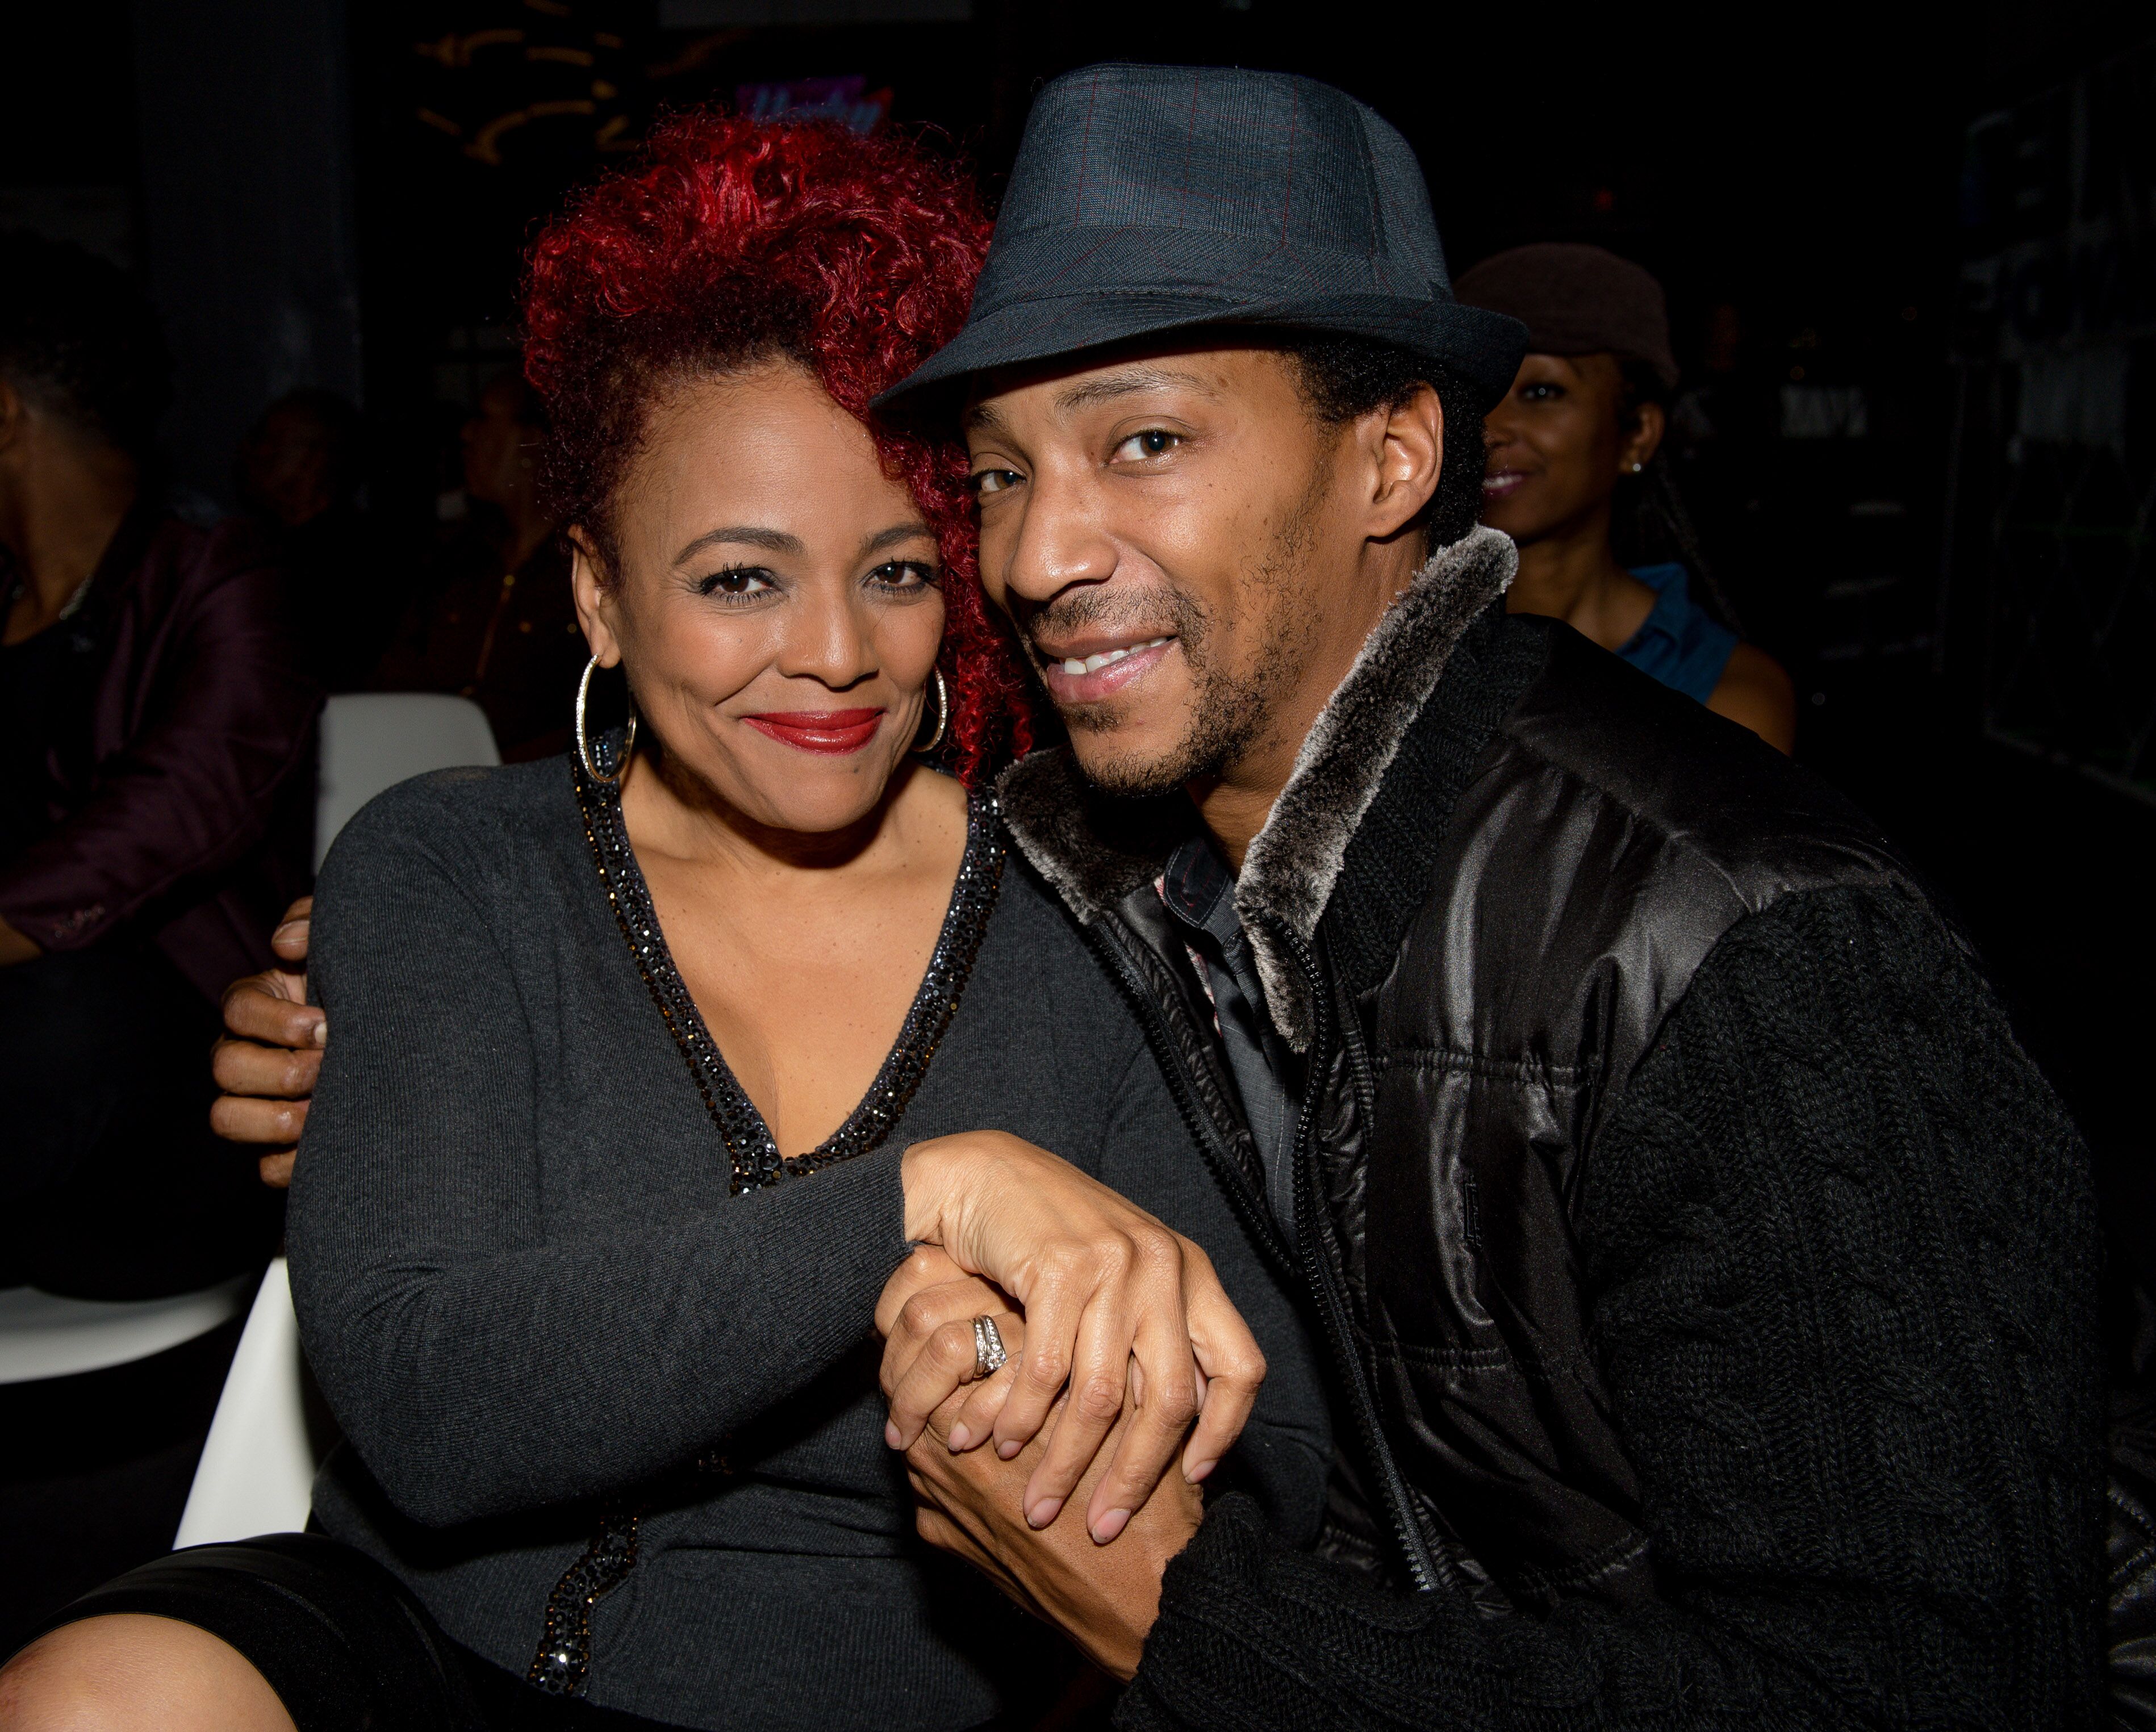 Kim Fields & Christopher Morgan at the "Happily After All" Book Release Celebration on Feb. 16, 2017 in Georgia. | Photo: Getty Images